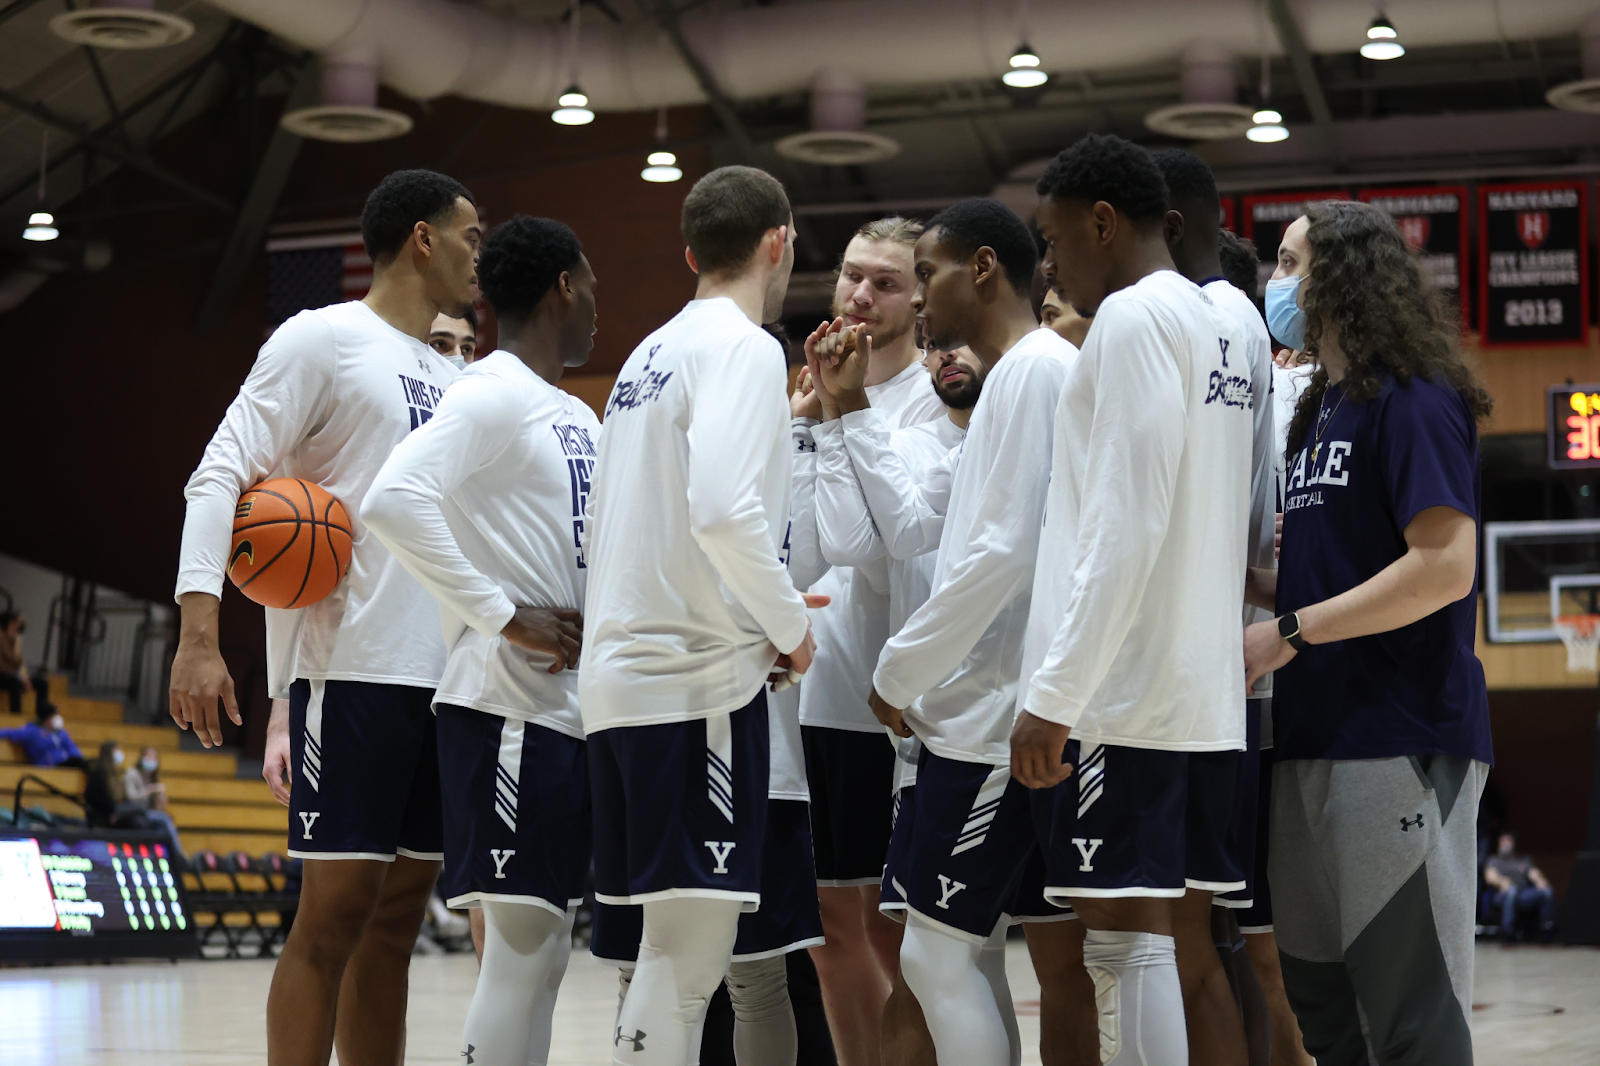 MEN'S BASKETBALL: “This Game is No Secret:” The story behind Yale's warmup  shirts last Friday - Yale Daily News